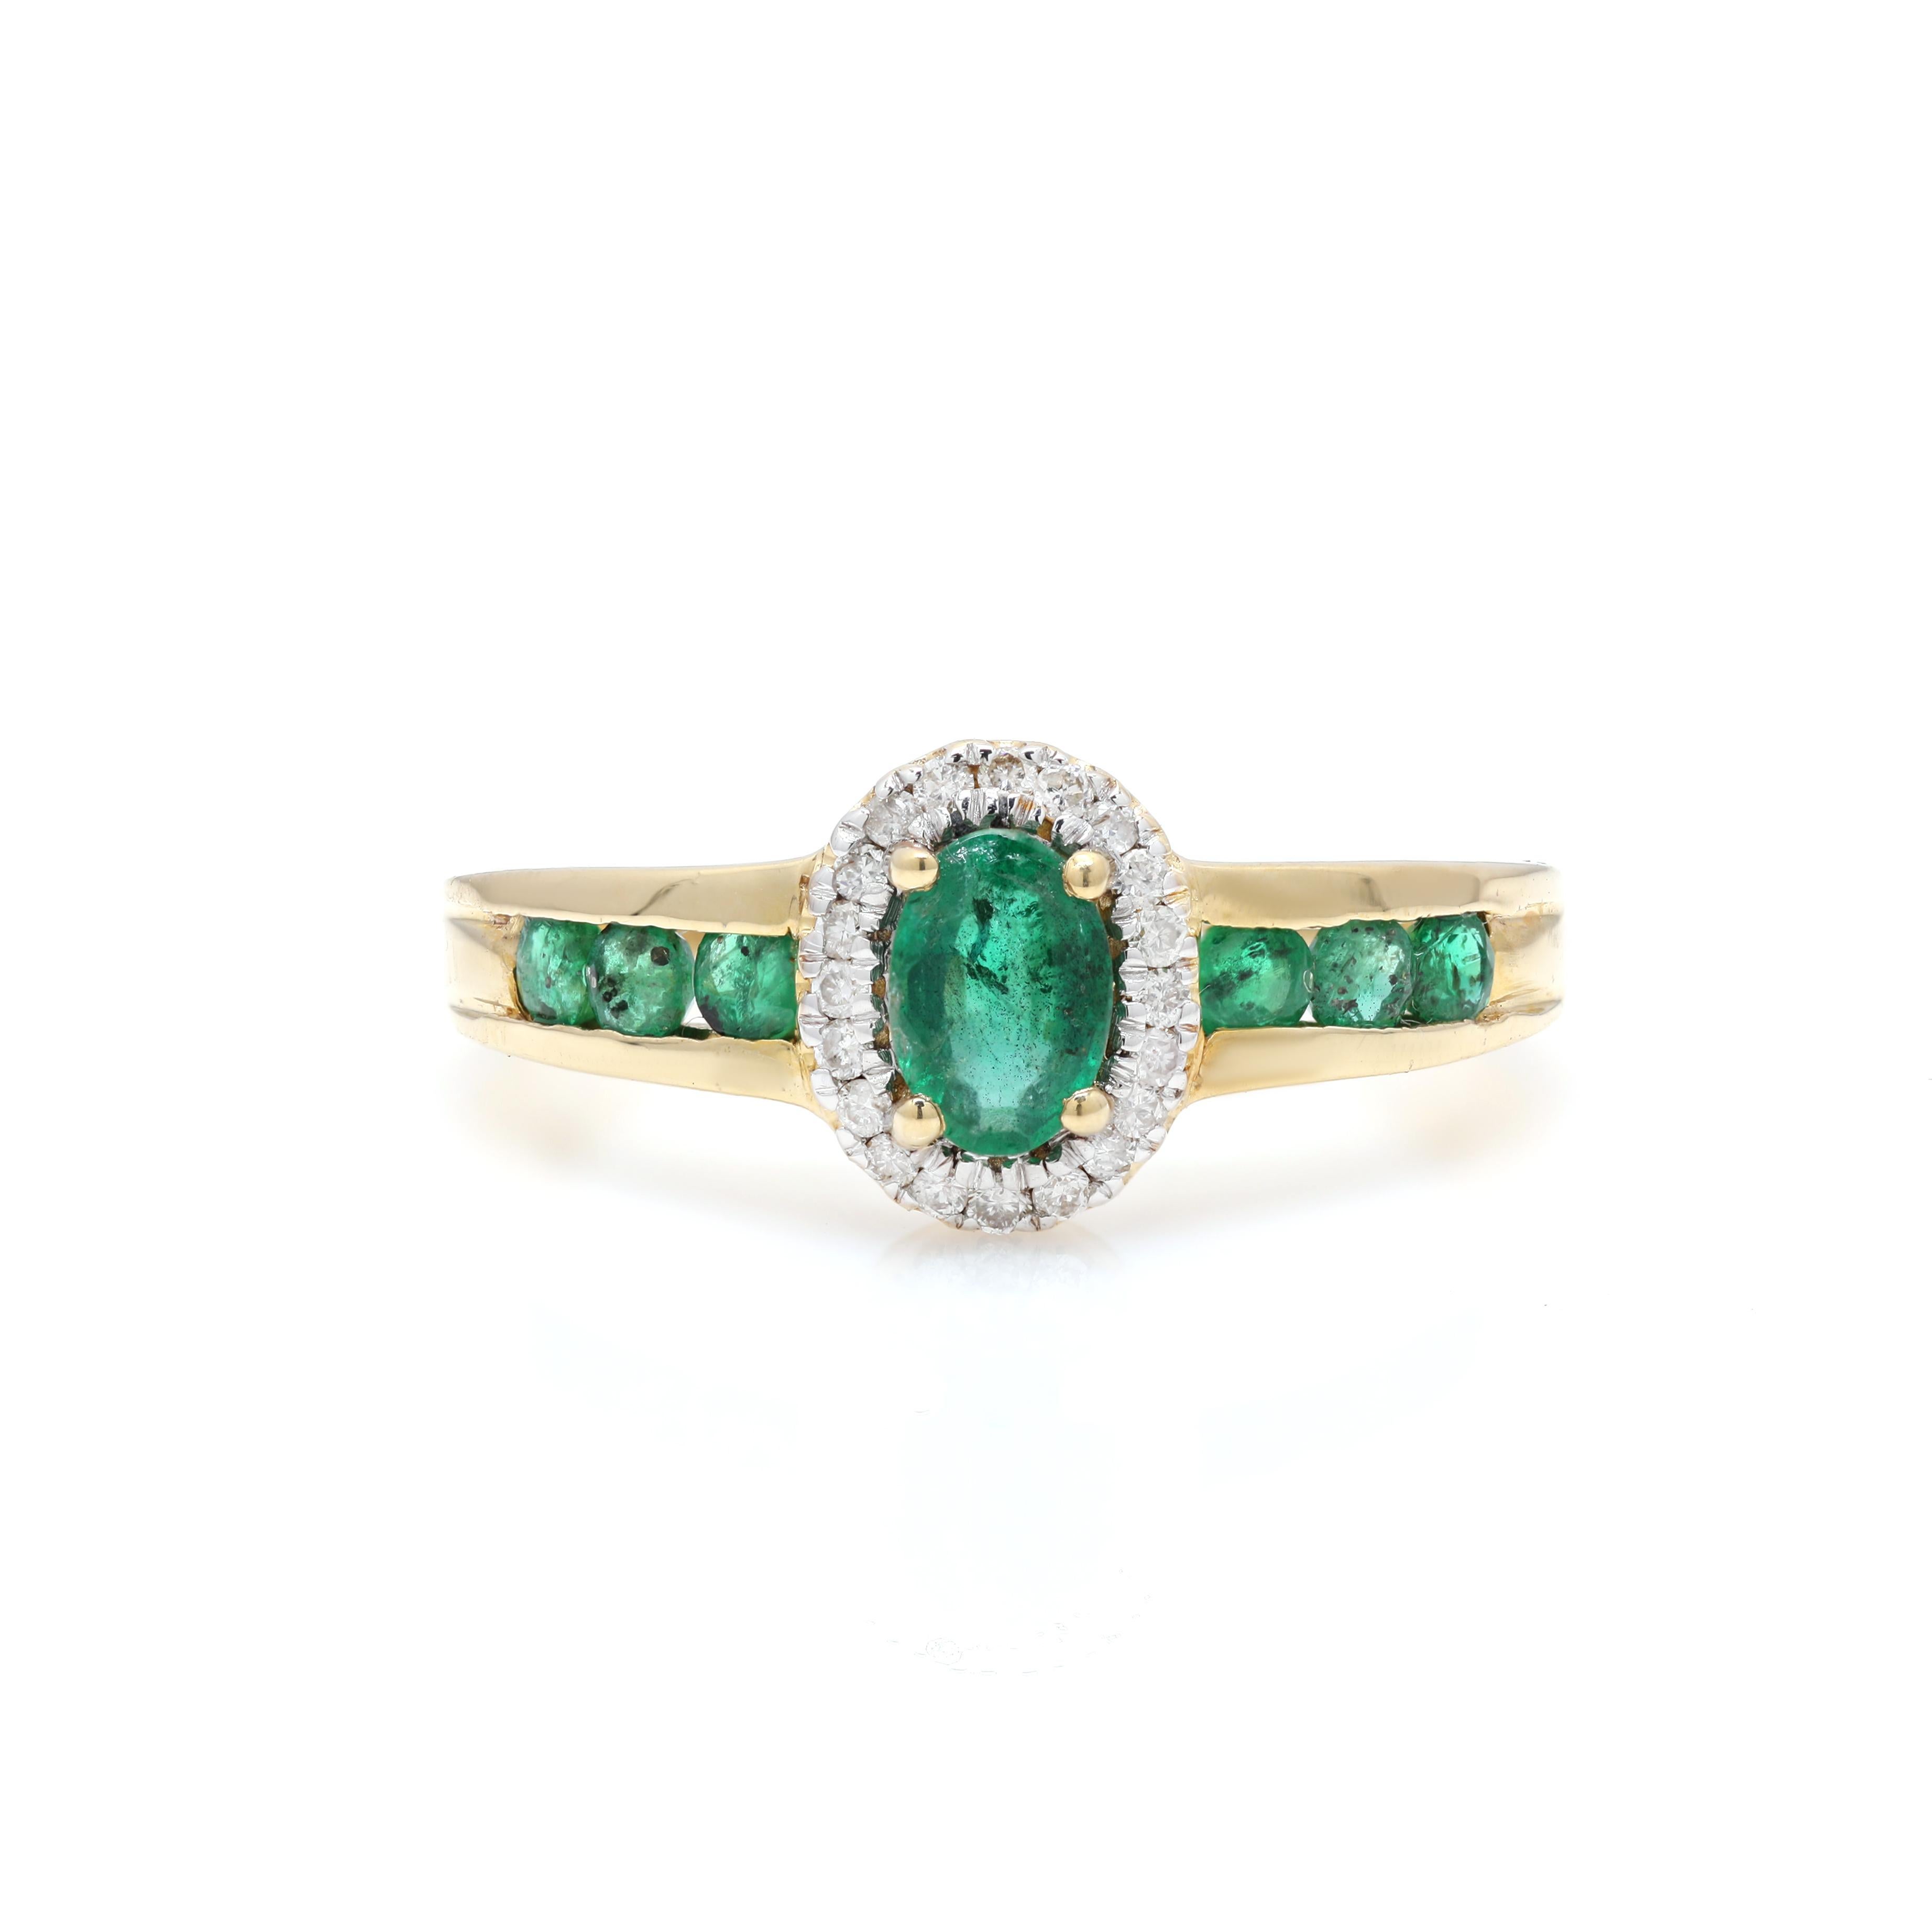 For Sale:  Emerald Engagement Ring with Halo Diamond Set in 14K Solid Yellow Gold 3